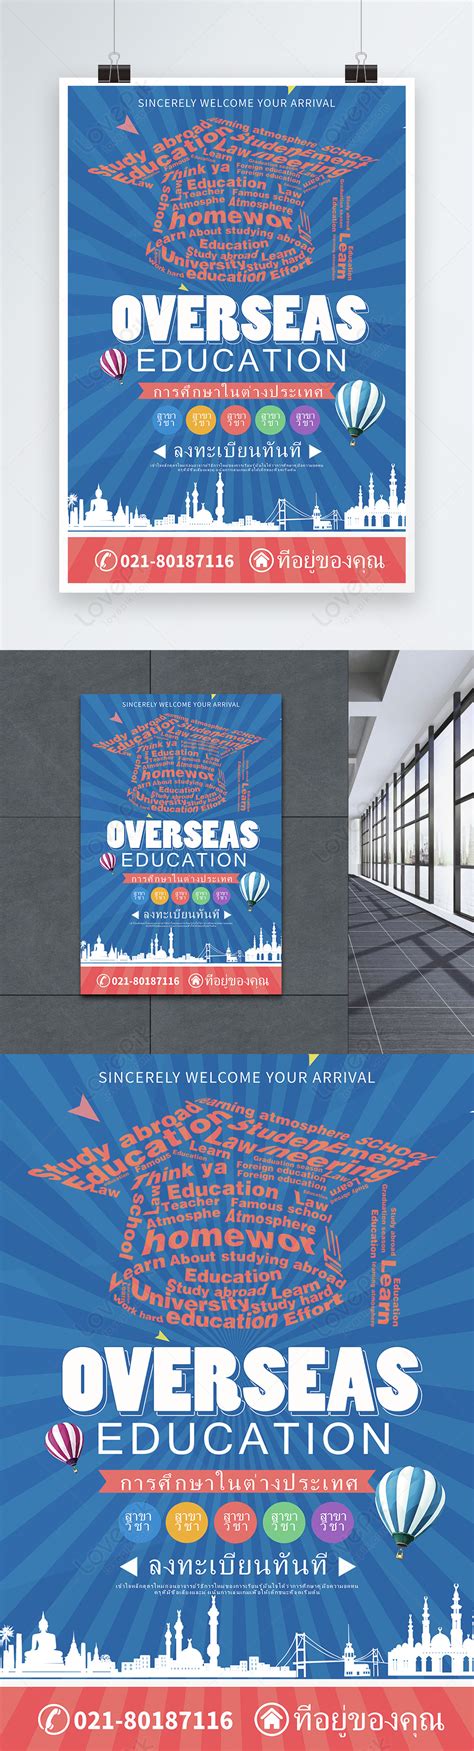 Study Abroad Poster Template Imagepicture Free Download 450000069